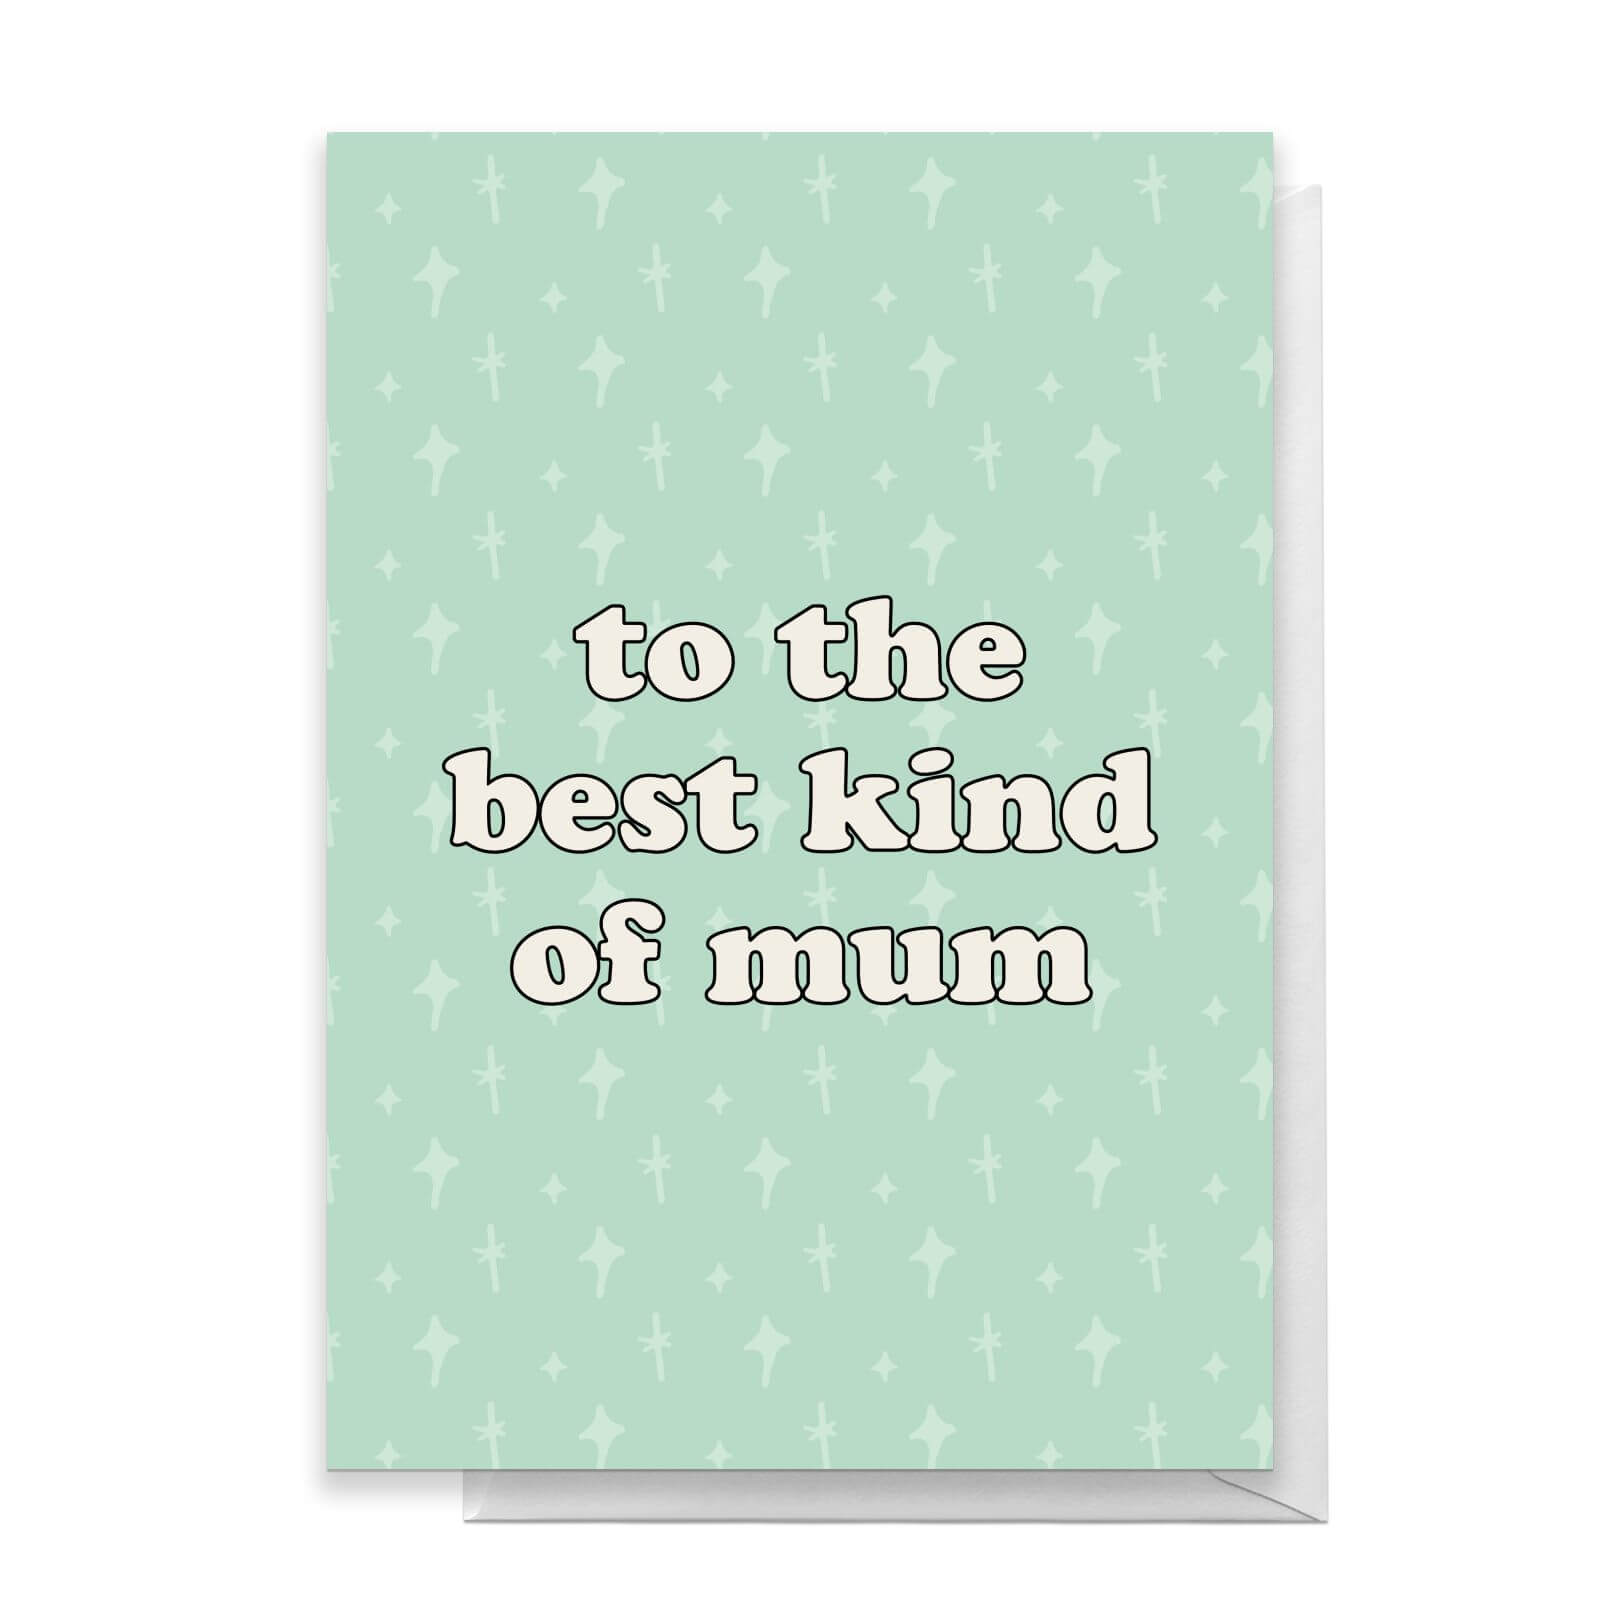 To The Best Kind Of Mum Greetings Card - Standard Card